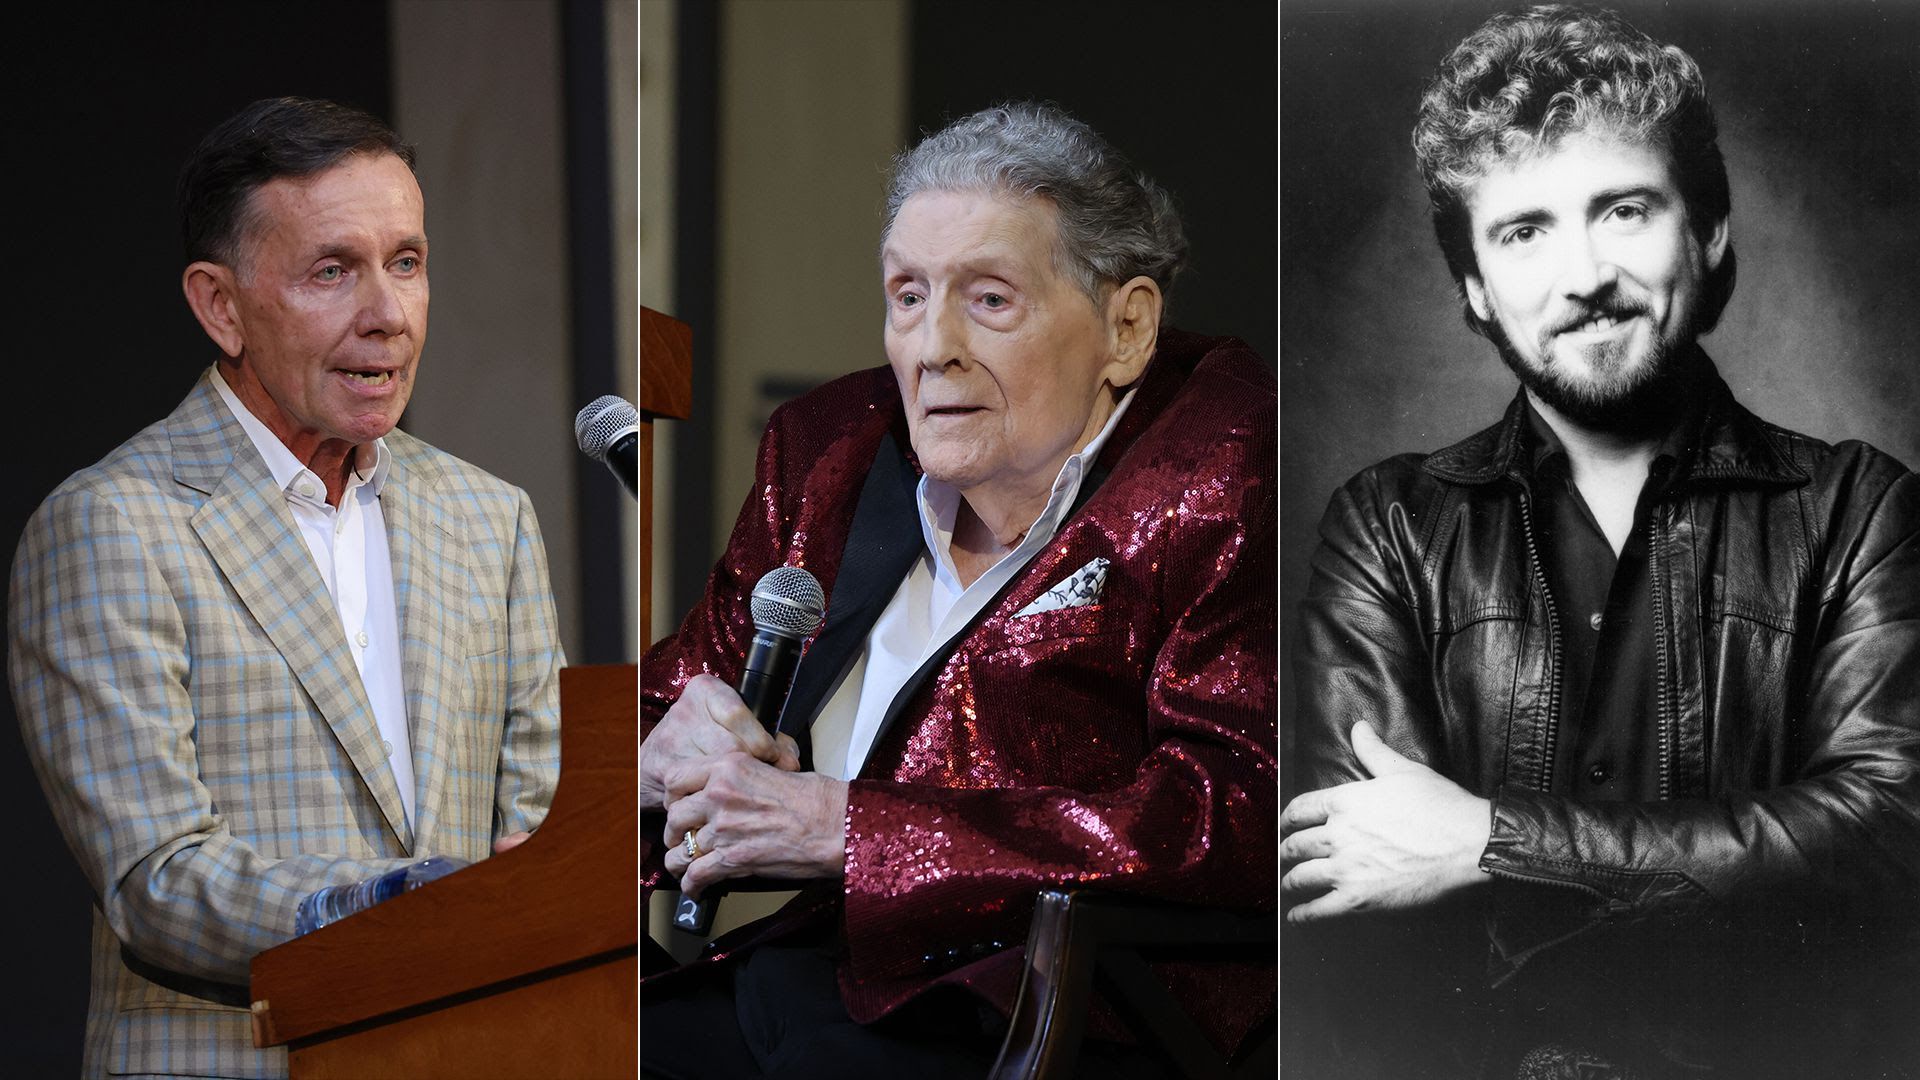 Executive Joe Galante, Jerry Lee Lewis and Keith Whitley layered in one photo 